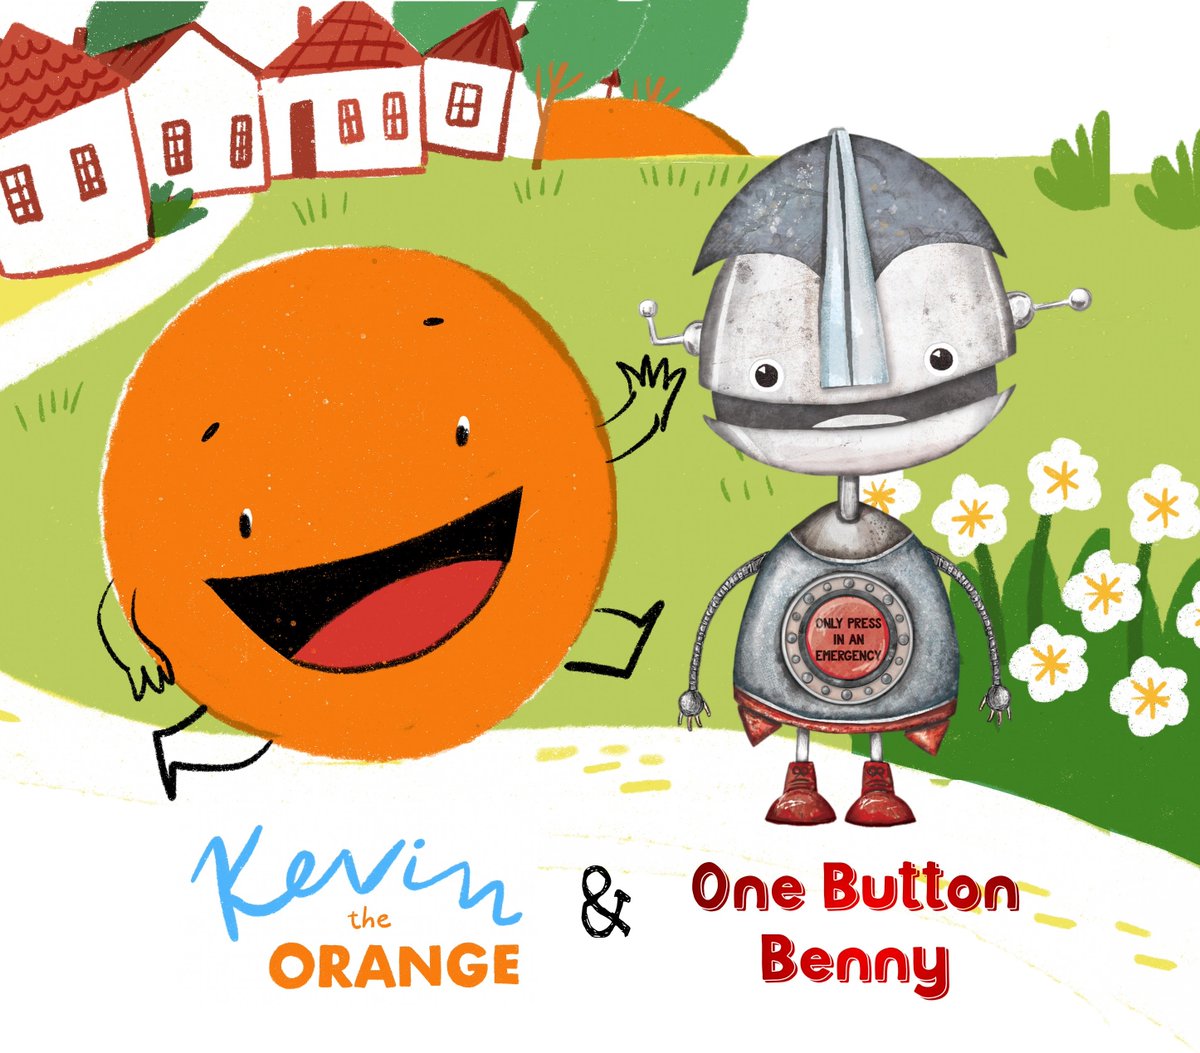 Join award winning author @akwindram on Sat 8 June for a fun-filled children’s event with his latest books - One Button Benny and the Dinosaur Dilemma and Kevin The Orange. Tickets available at bit.ly/AlanWindramWes…